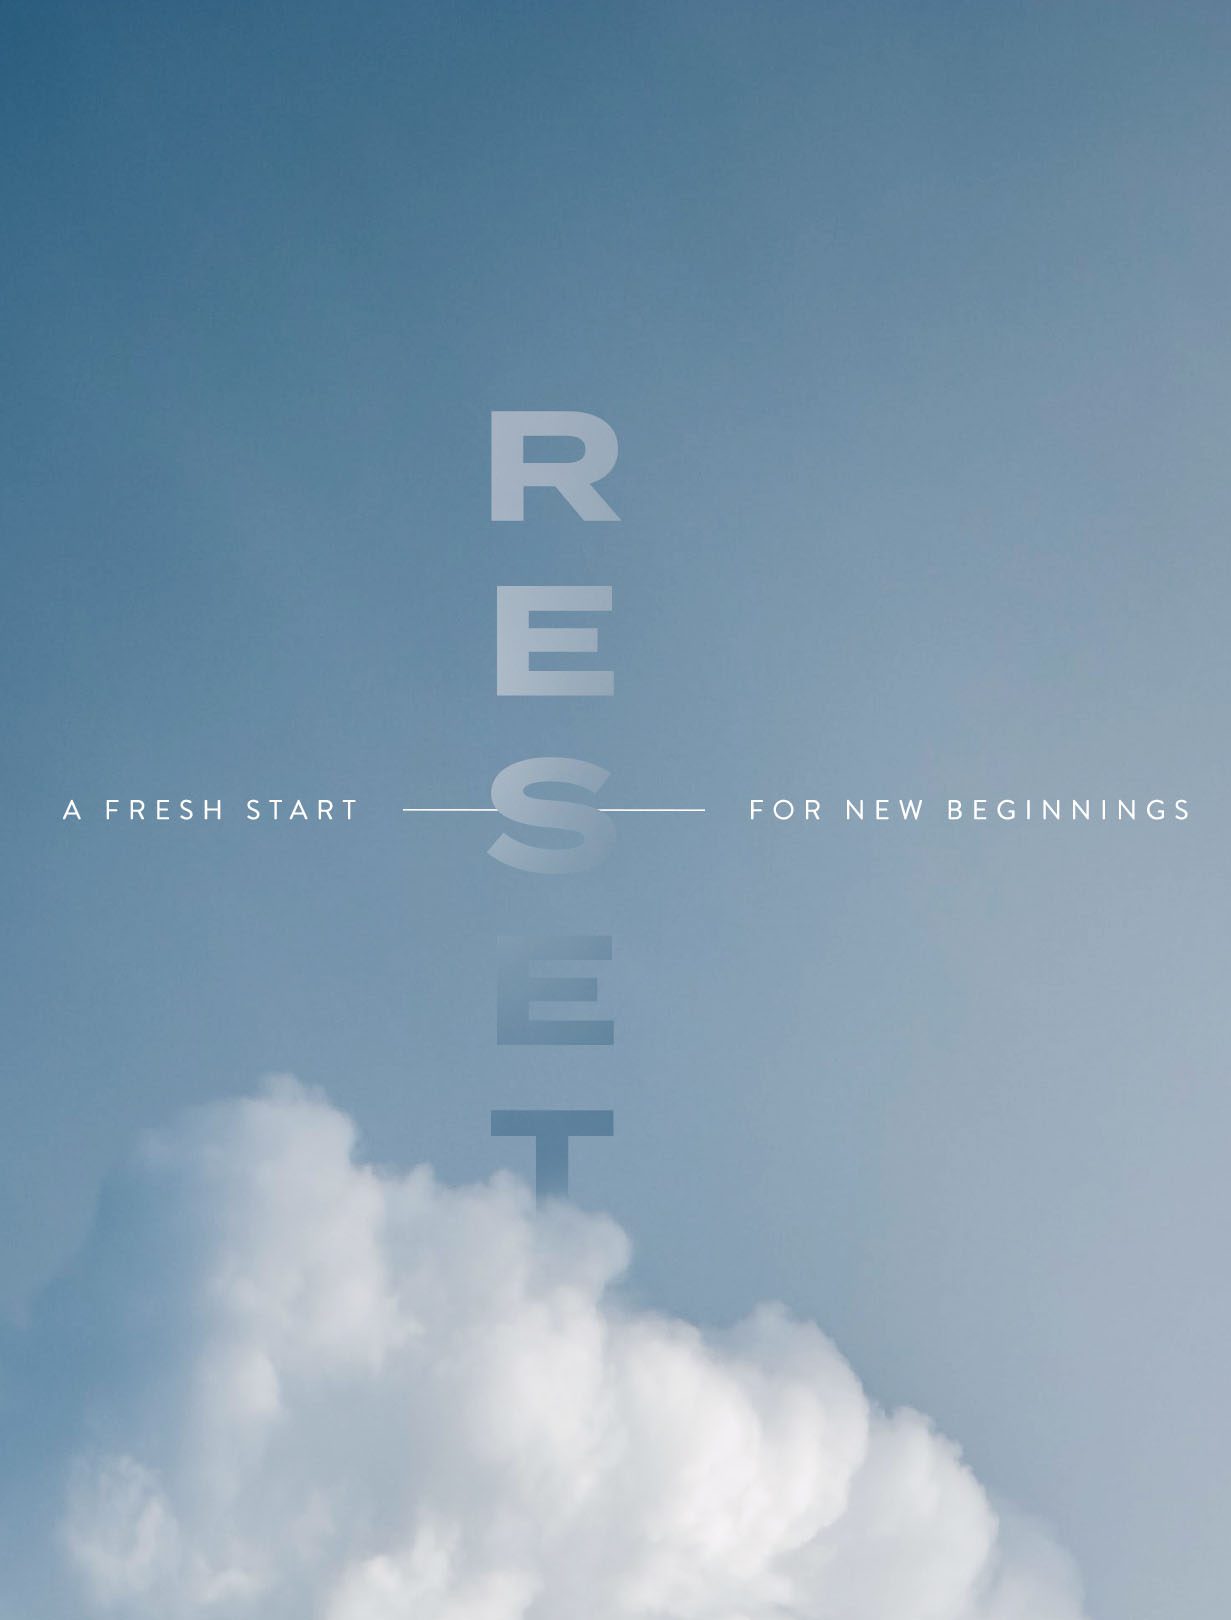 Reset: The Past and All I Am